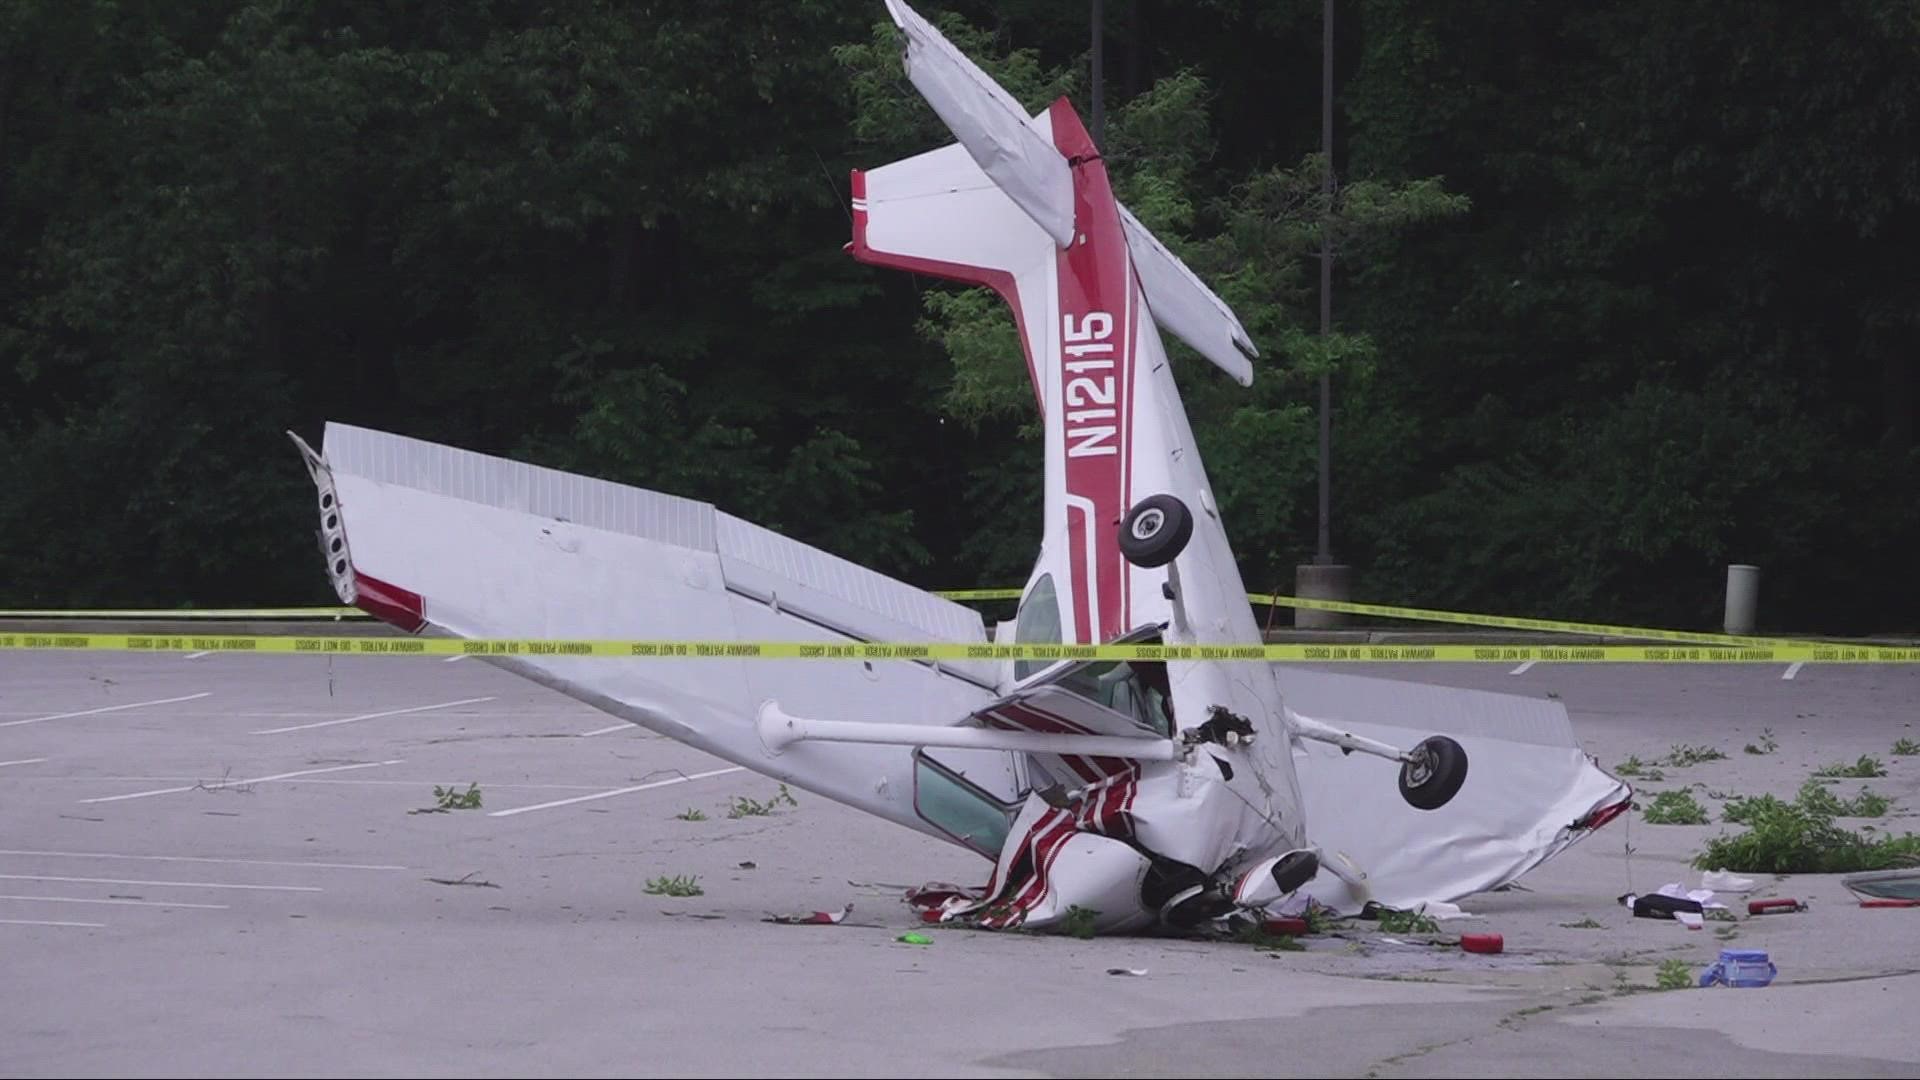 The aircraft went down in a parking lot not far from the Hyre Community Learning Center.